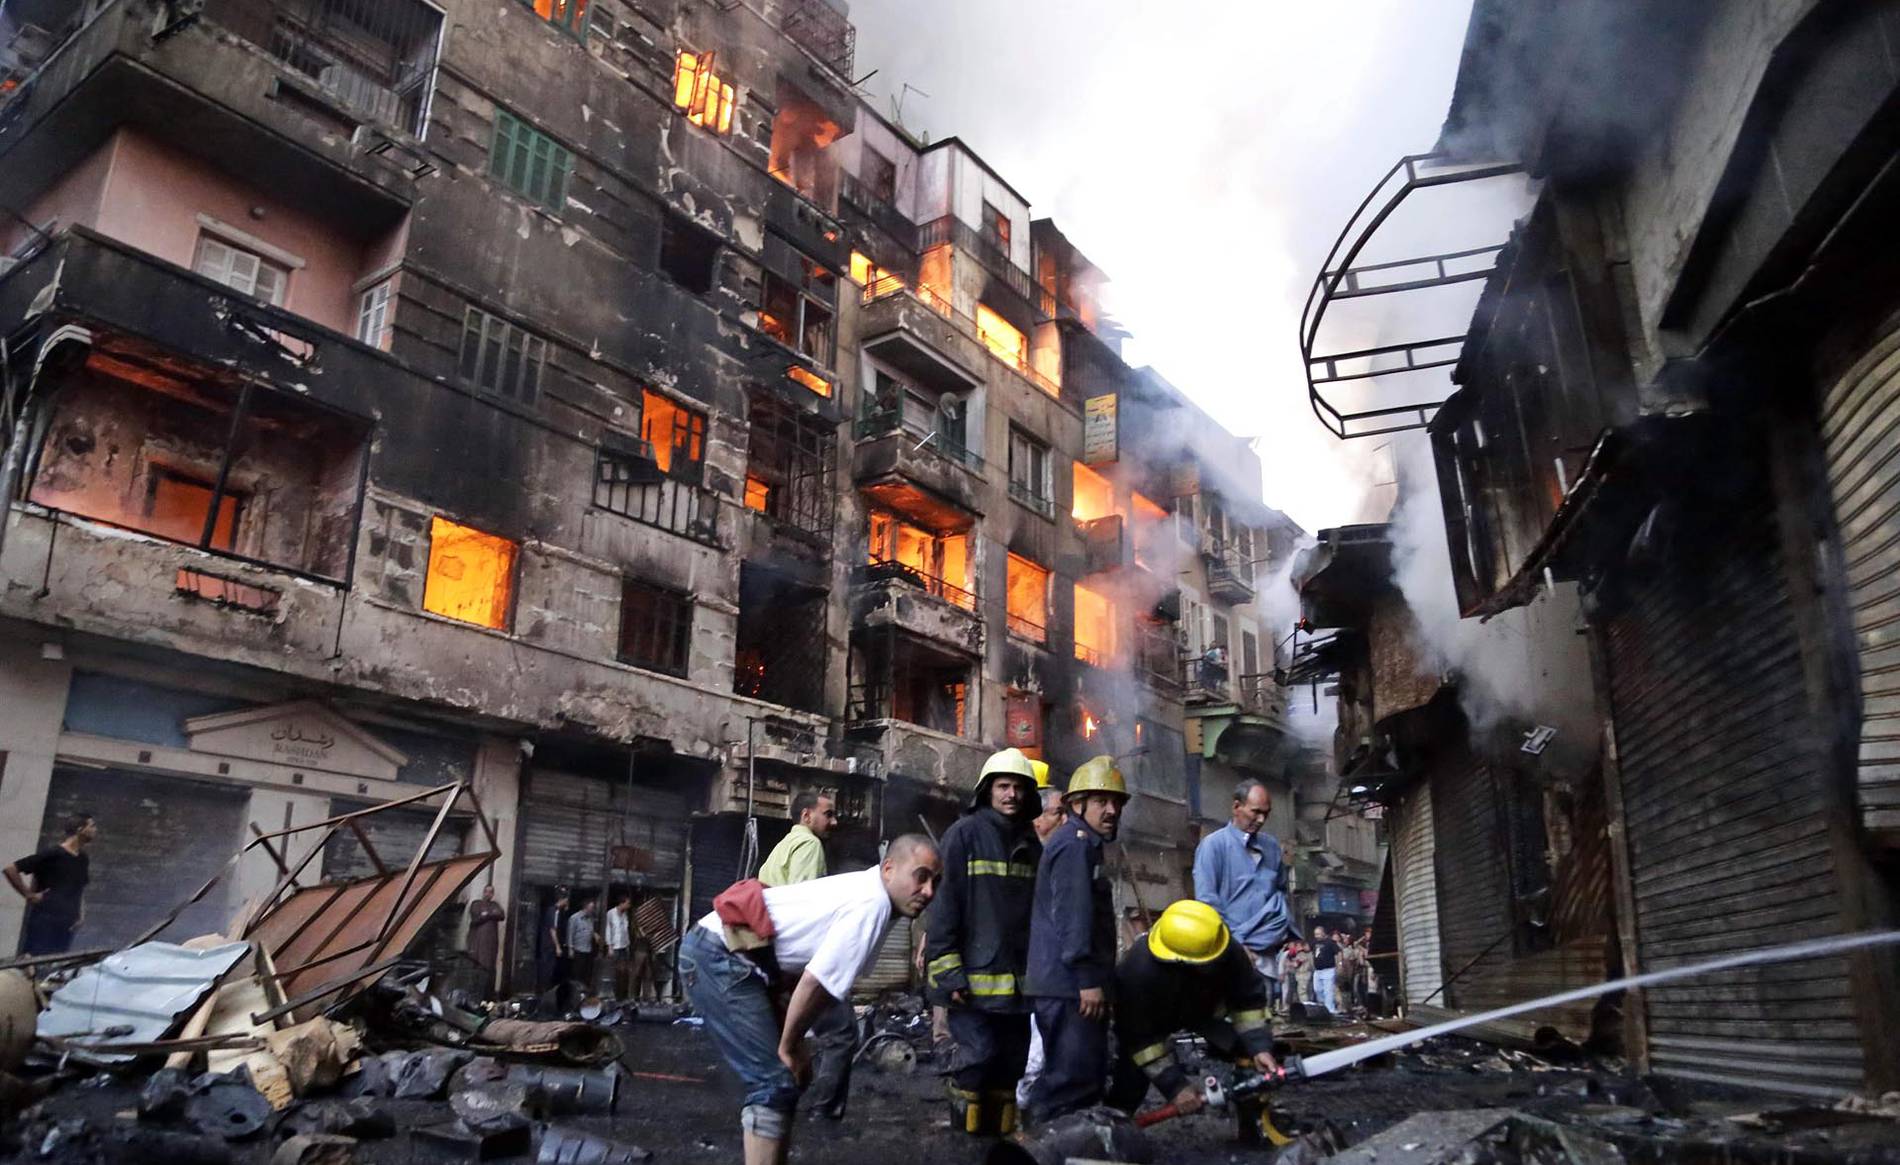 The fires continued on Monday in the buildings in Al-Rewaei while firefighters attempted it to put it off (Photo: AFP)